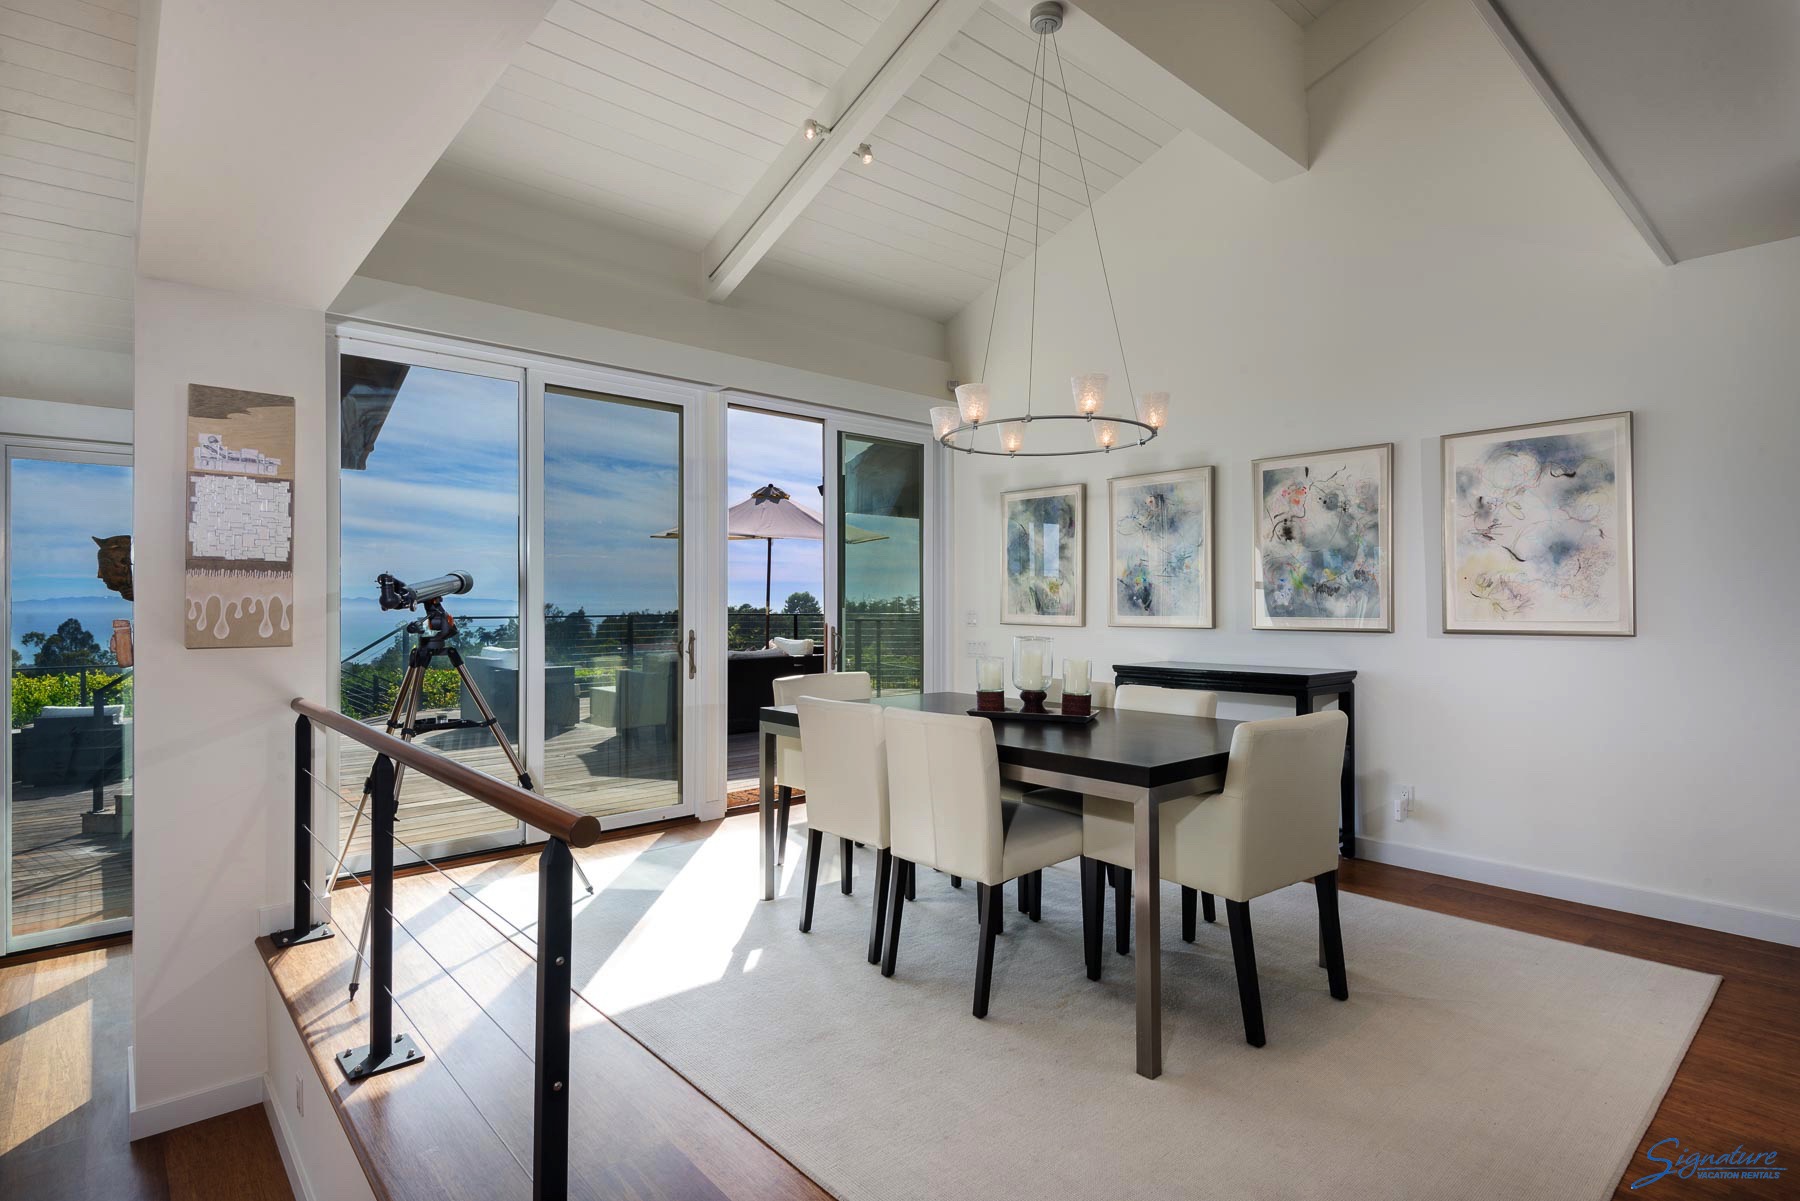 The dining area showcases the wonderful views and has a door to the deck